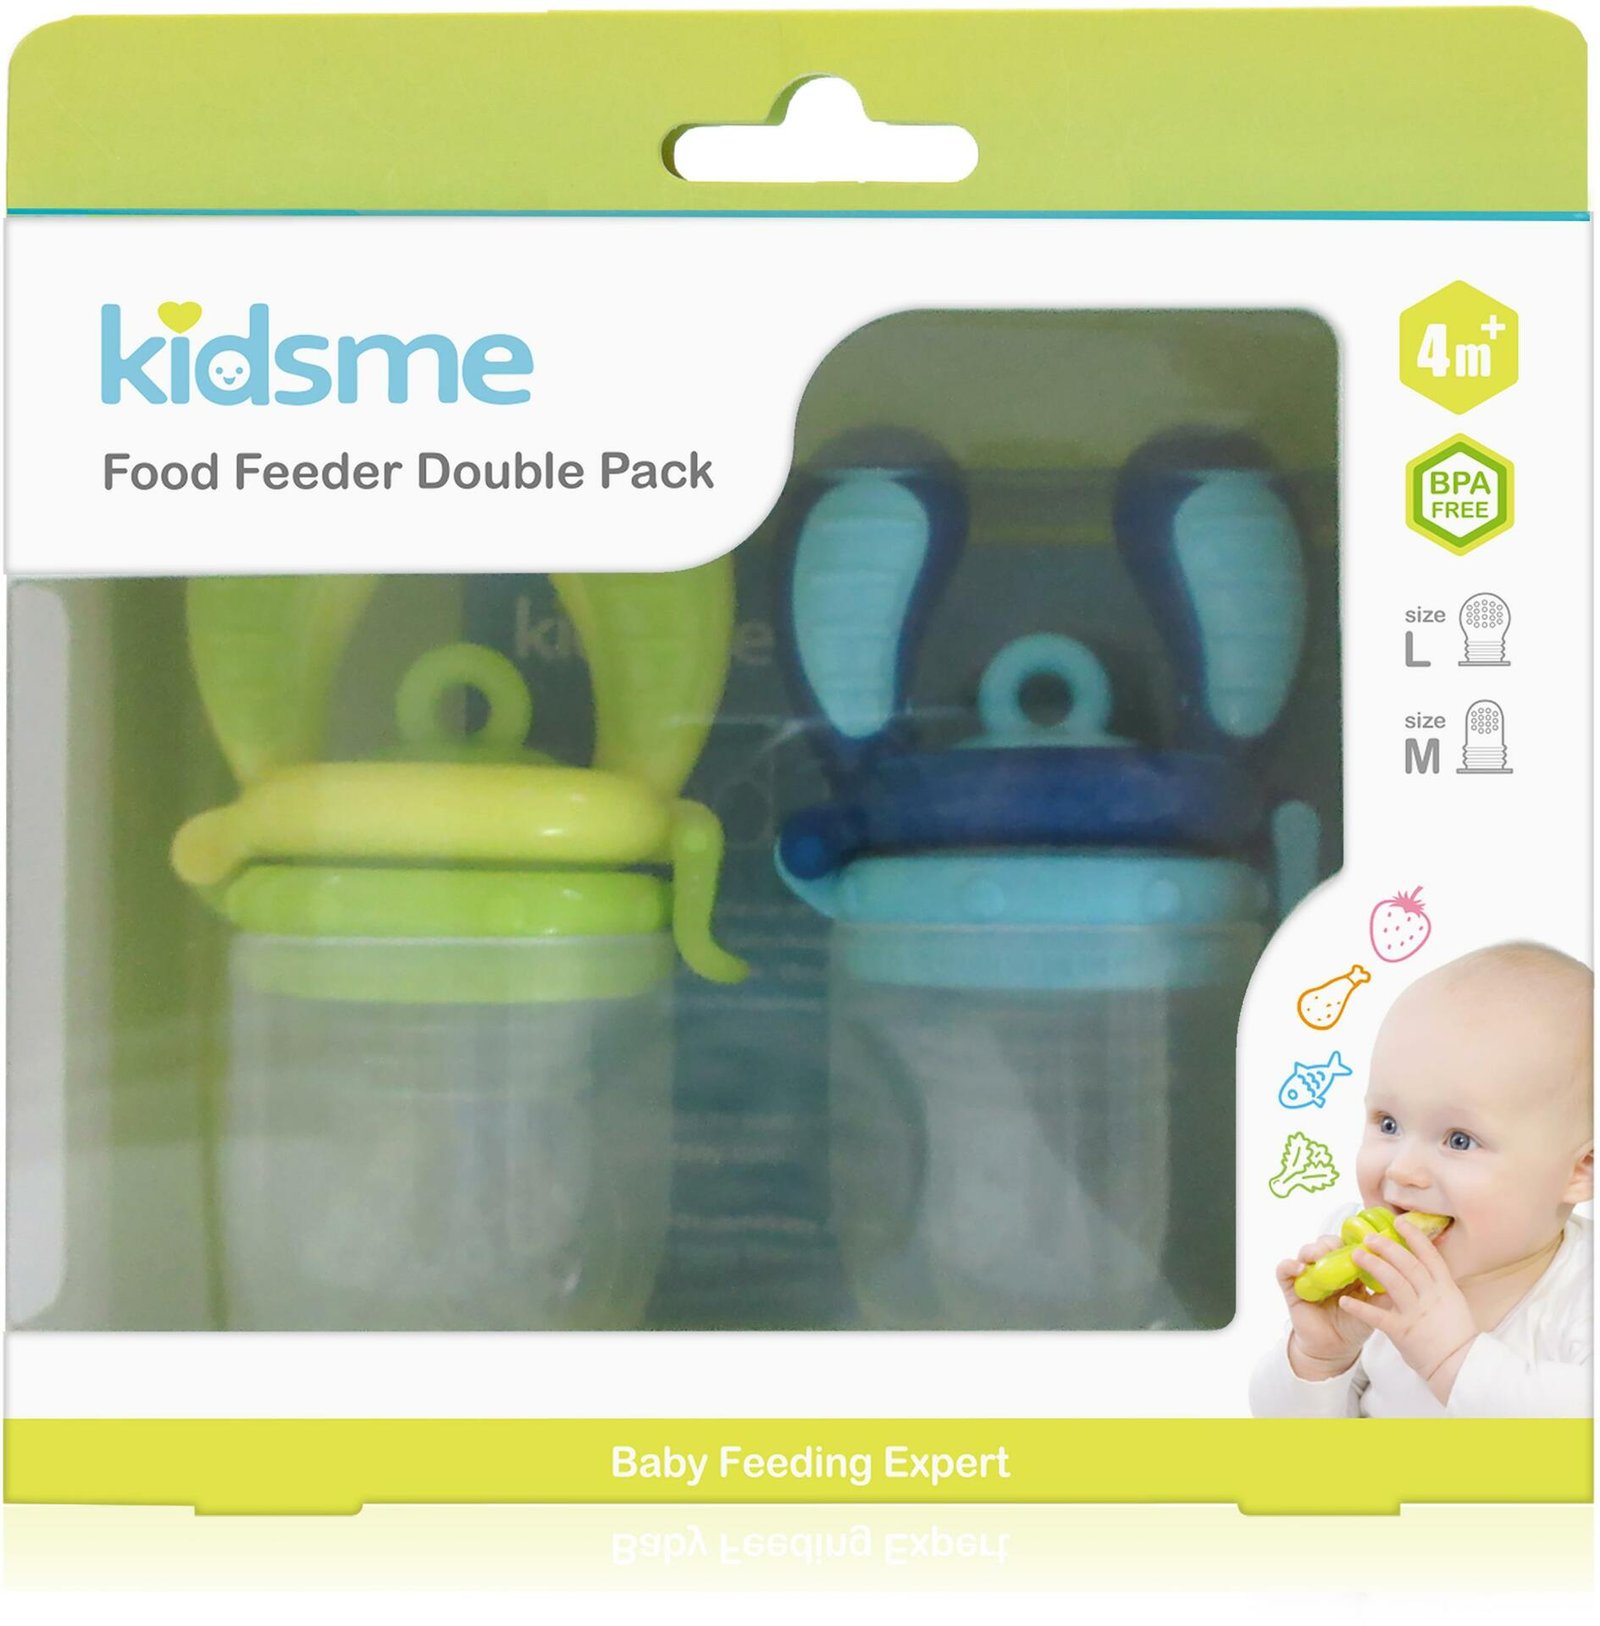 Kidsme FoodFeeder Double Pack 4m+ & 6m+ 2 st